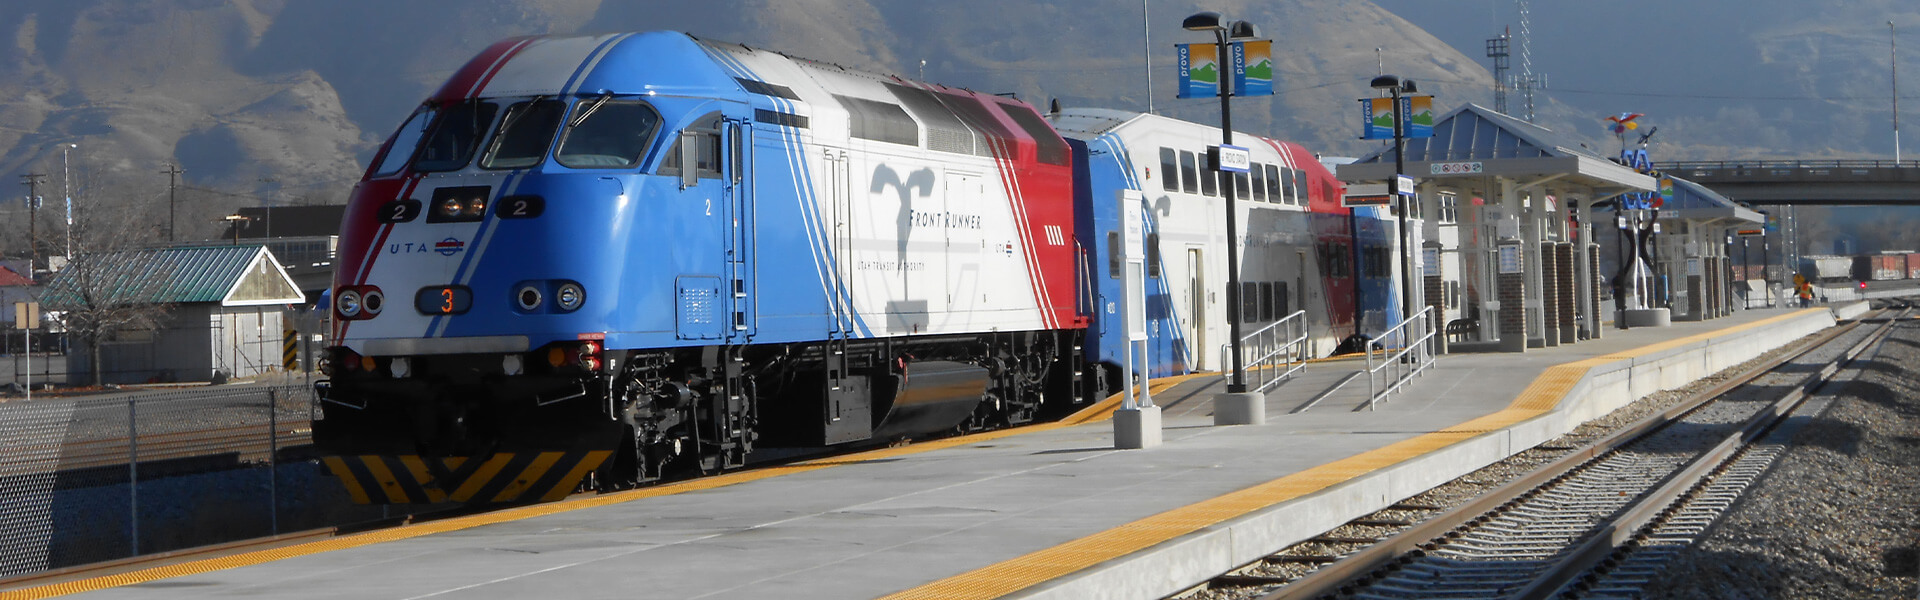 Utah Transit Authority (UTA) awards and implements TDX on its FrontRunner North commuter rail line. Since this first implementation, TDX has been integrated and implemented on all UTA's commuter and light rail systems.